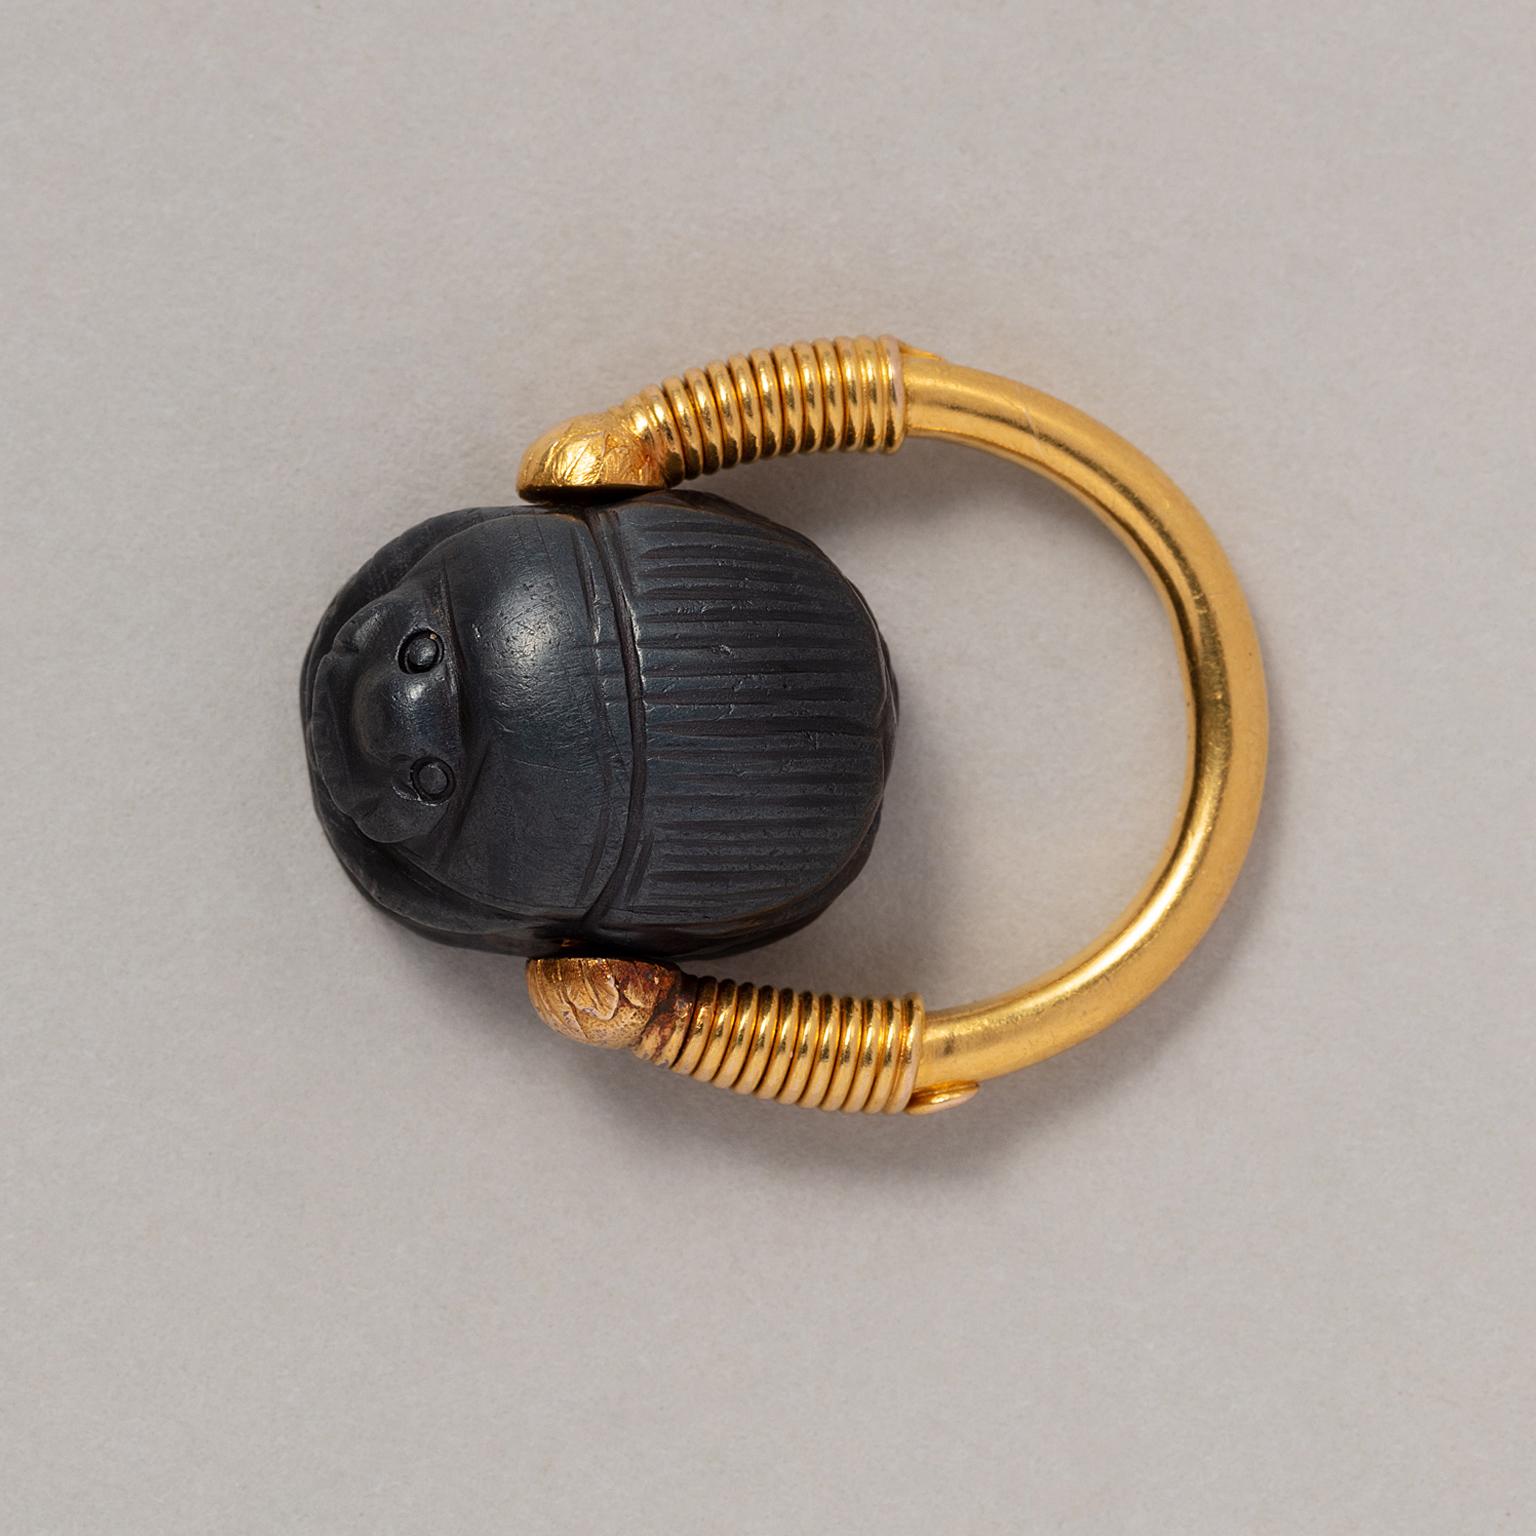 An 18 carat gold ring with a rotating stylised ancient Egyptian scarab carved from anthracite jasper, or other hard stone, France, French assay mark for gold and maker’s mark circa 1920.

ring size: 16 mm / 5.5 US
weight: 11.2 grams